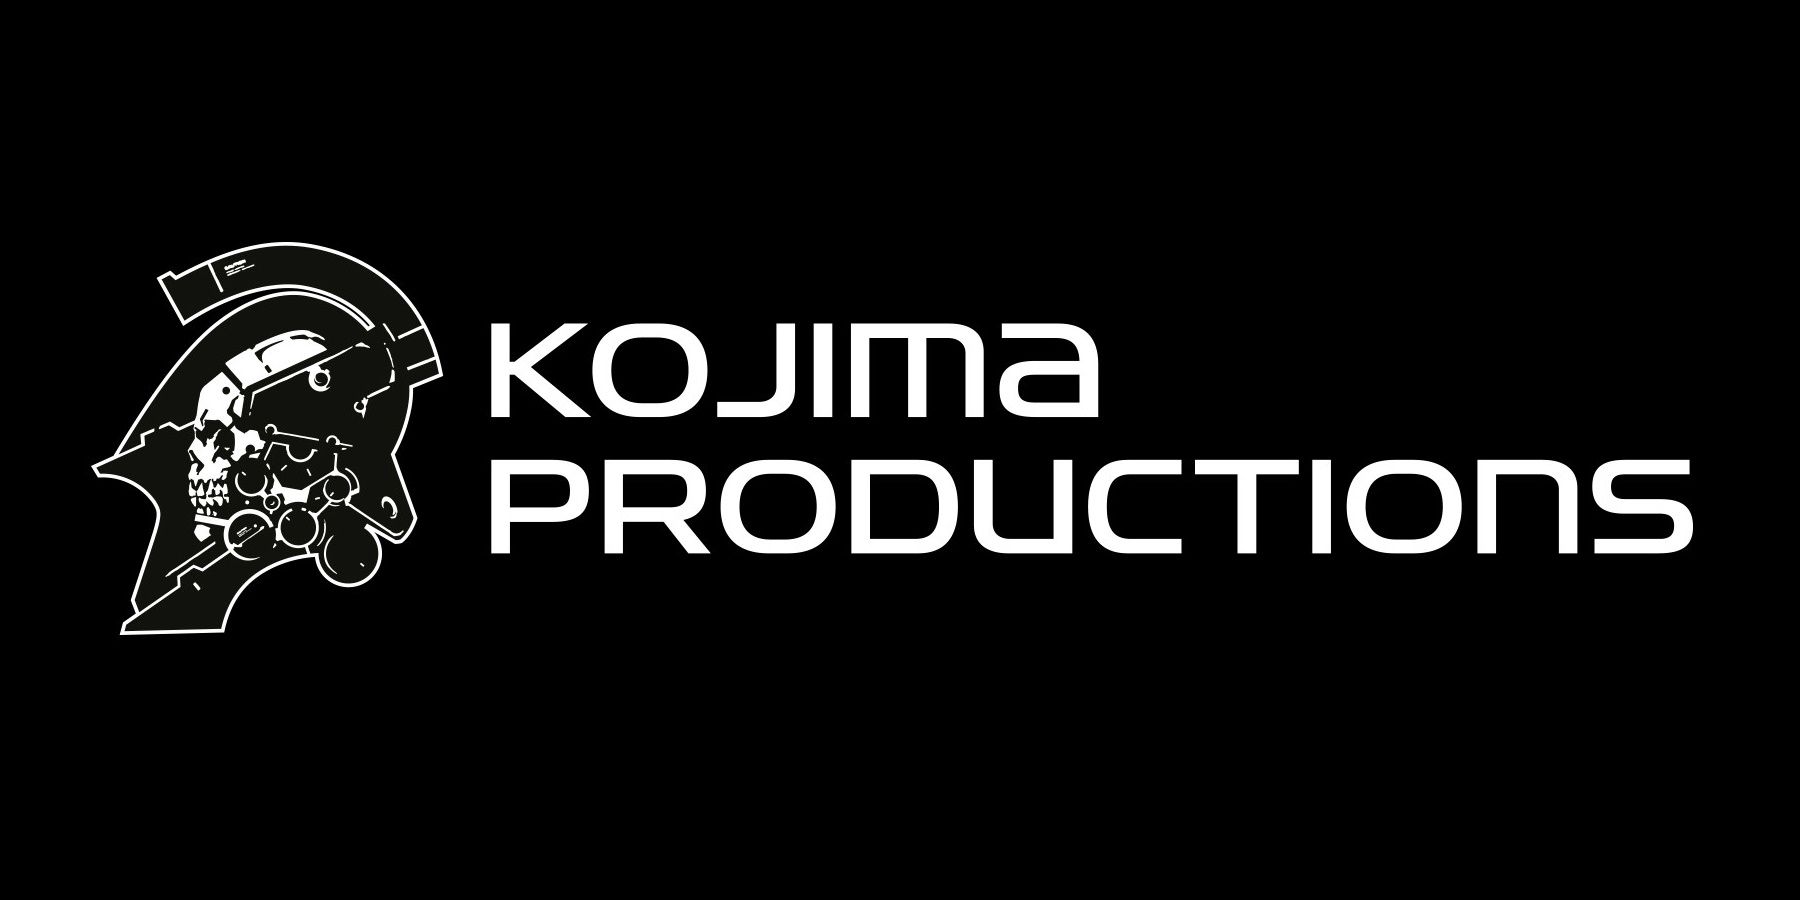 Kojima Productions to pursue legal action after Hideo Kojima falsely linked  to the assassination of Shinzo Abe on Twitter